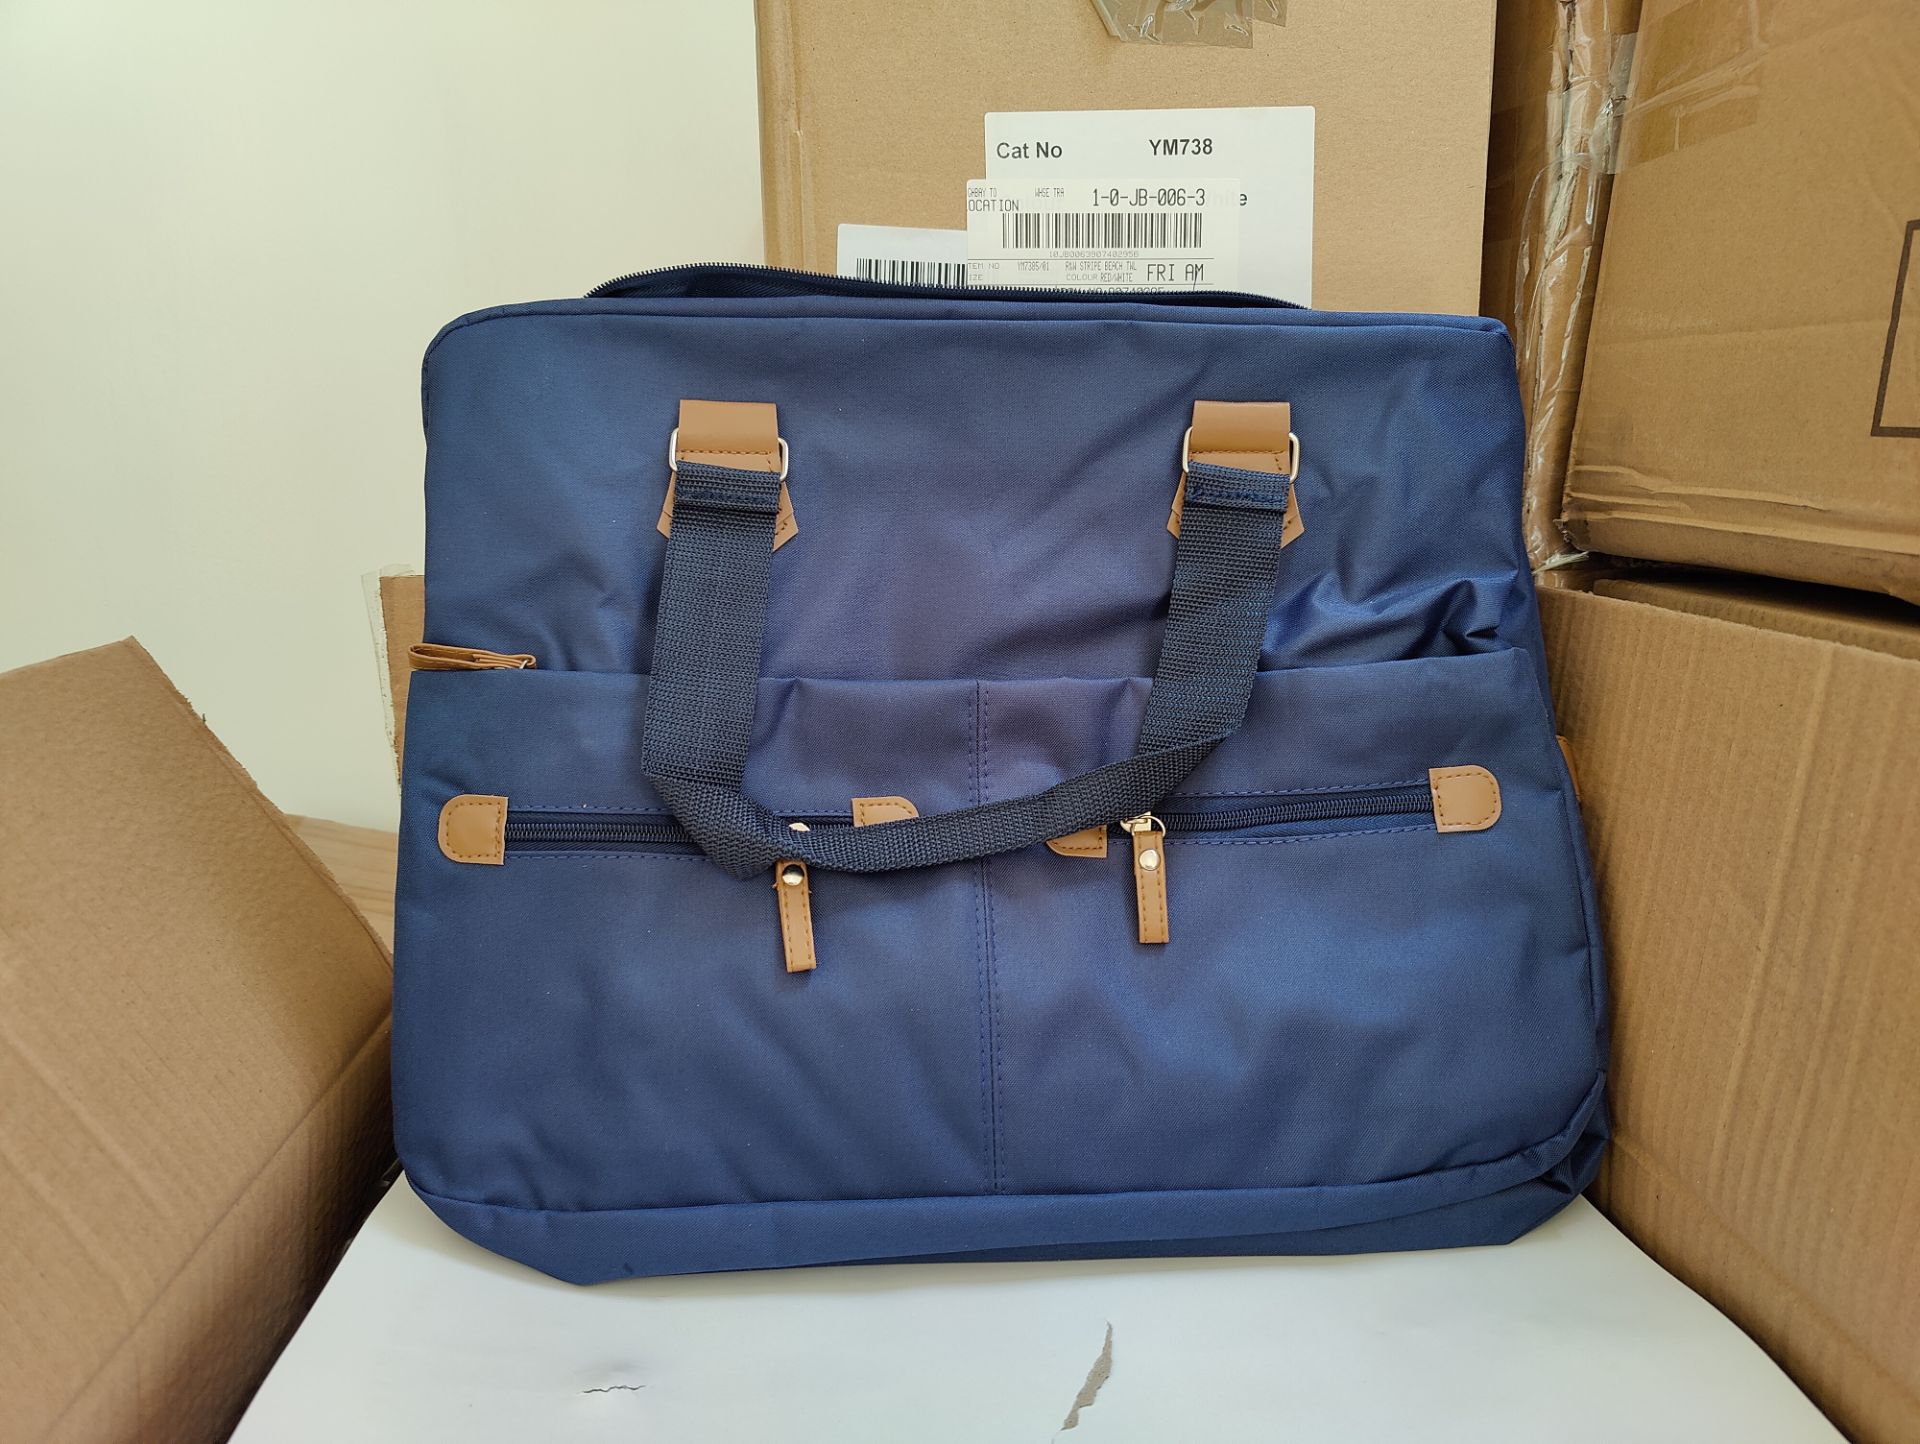 3 x Navy Luxury Weekend Bag With Zip Pockets and Storage Compartments - Image 2 of 2